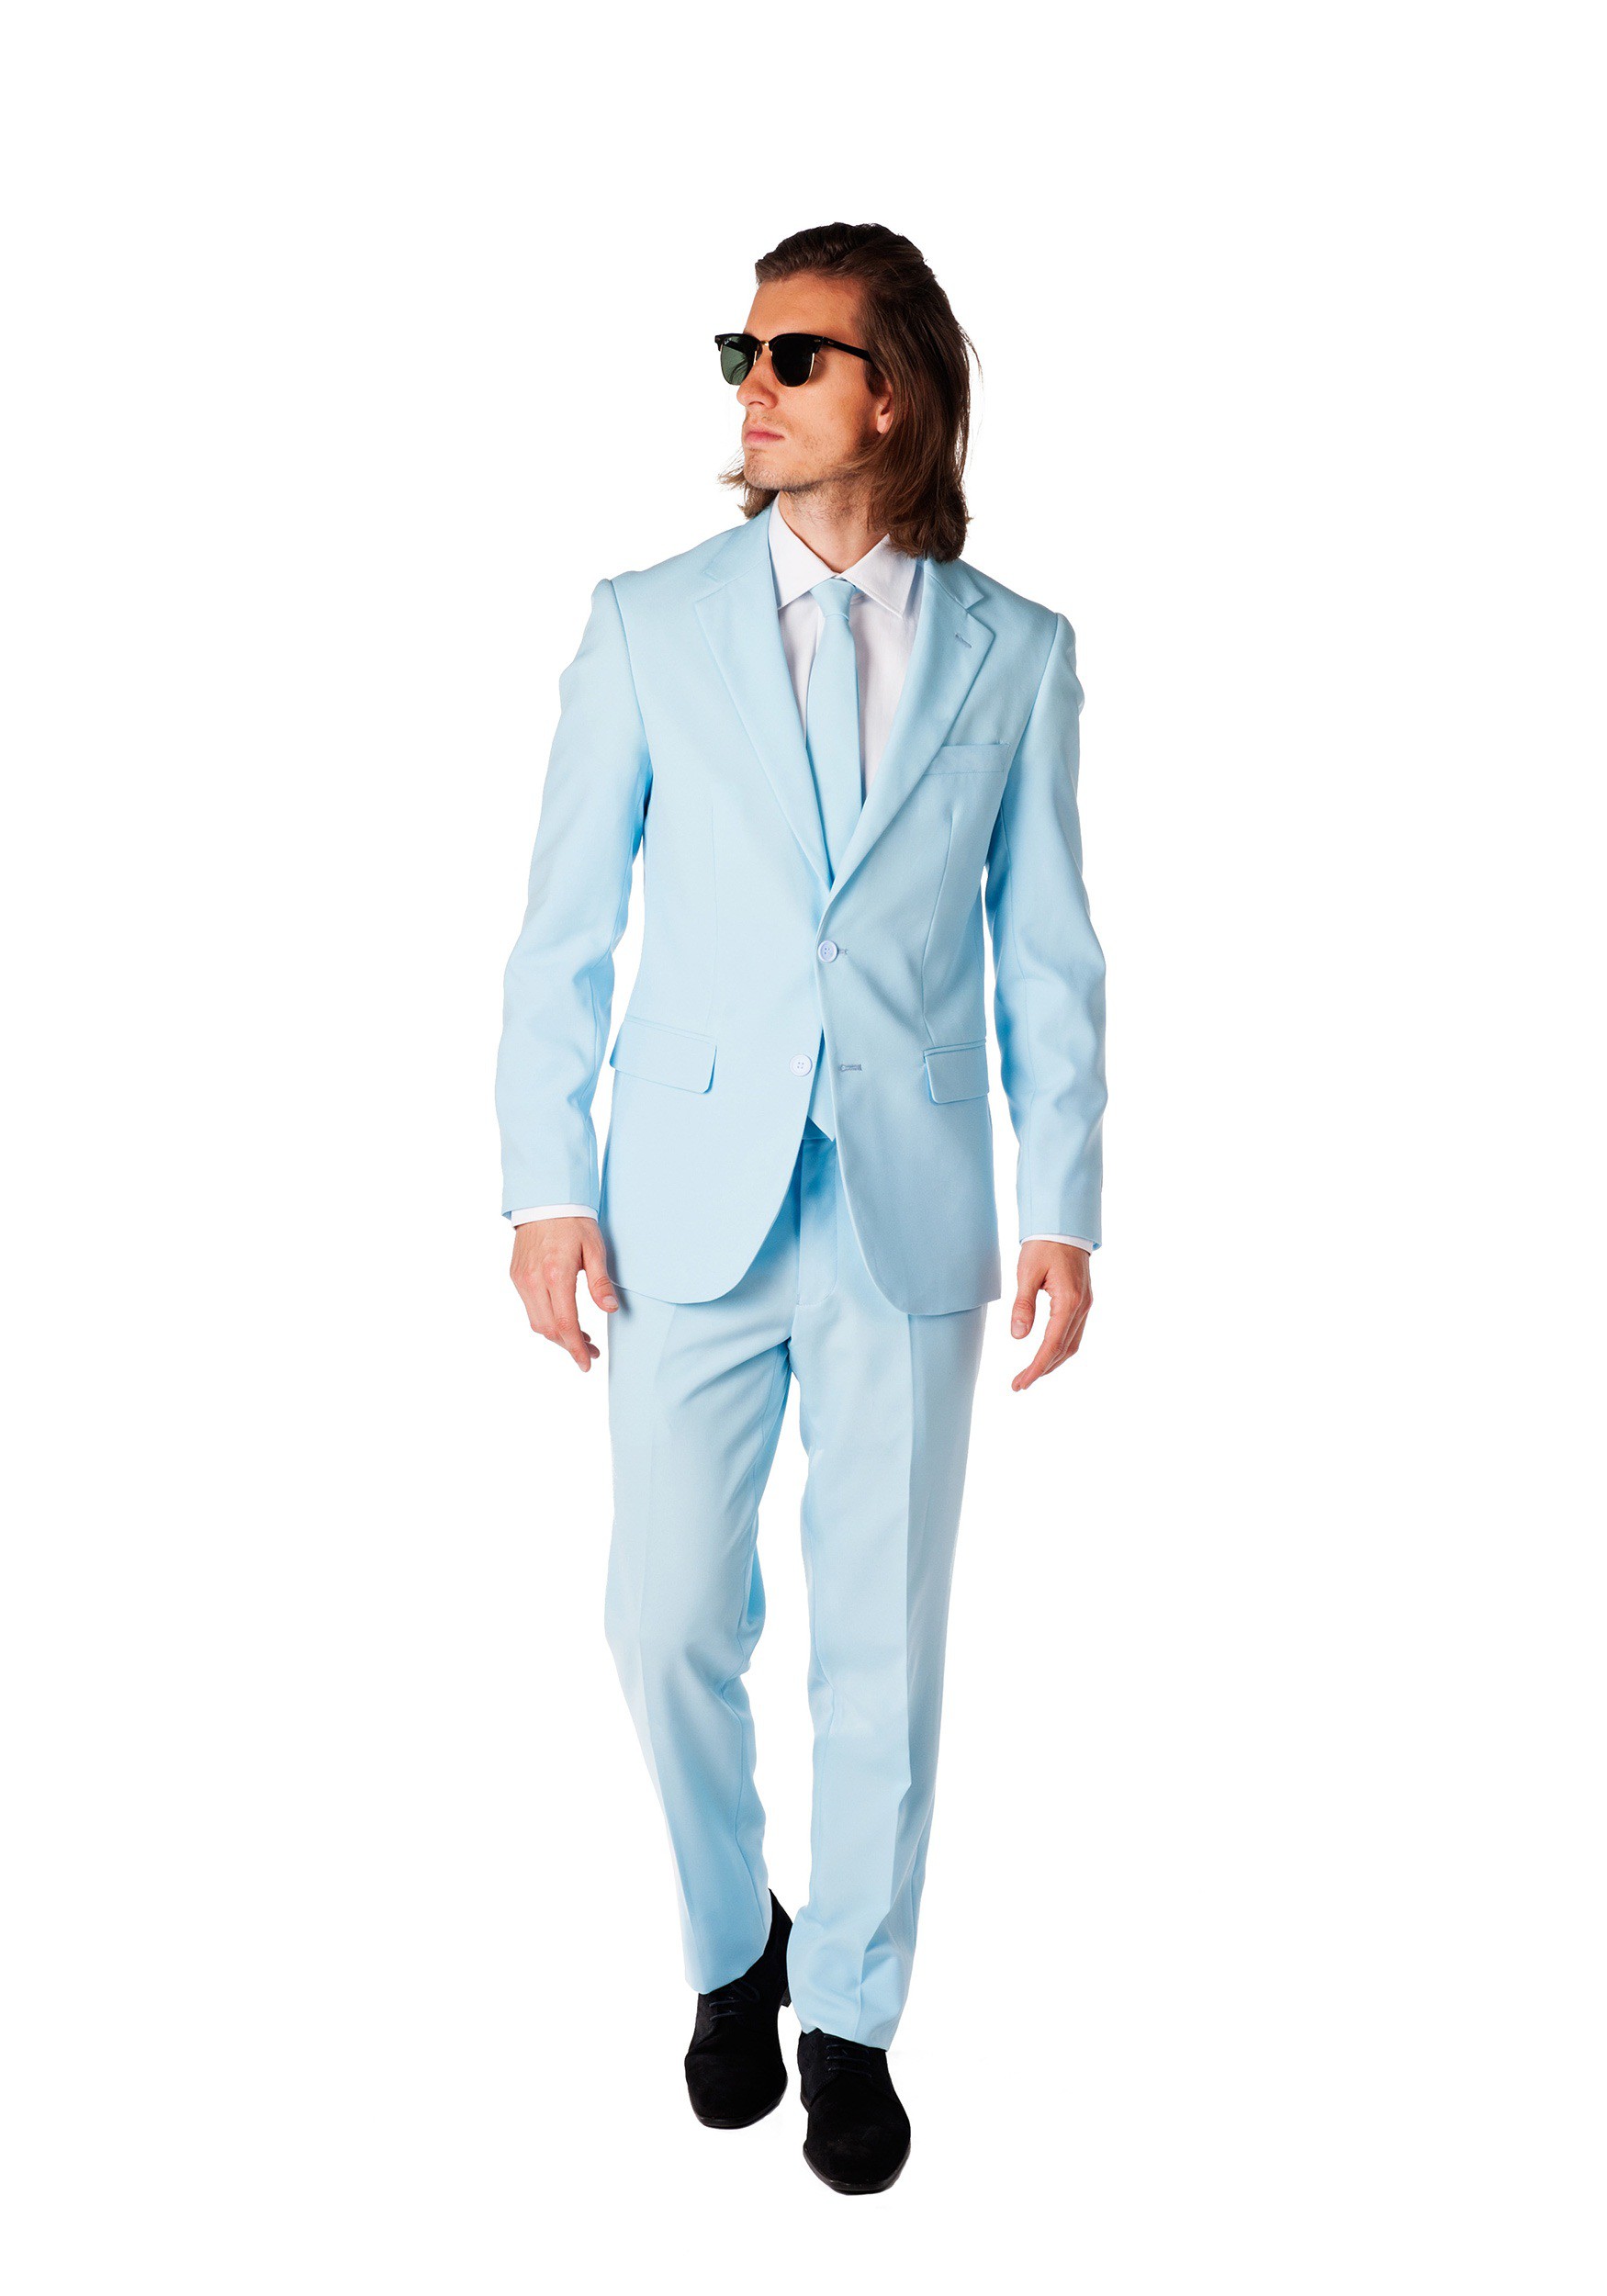 Image of Men's OppoSuits Baby Blue Suit ID OSOSUI0030-40